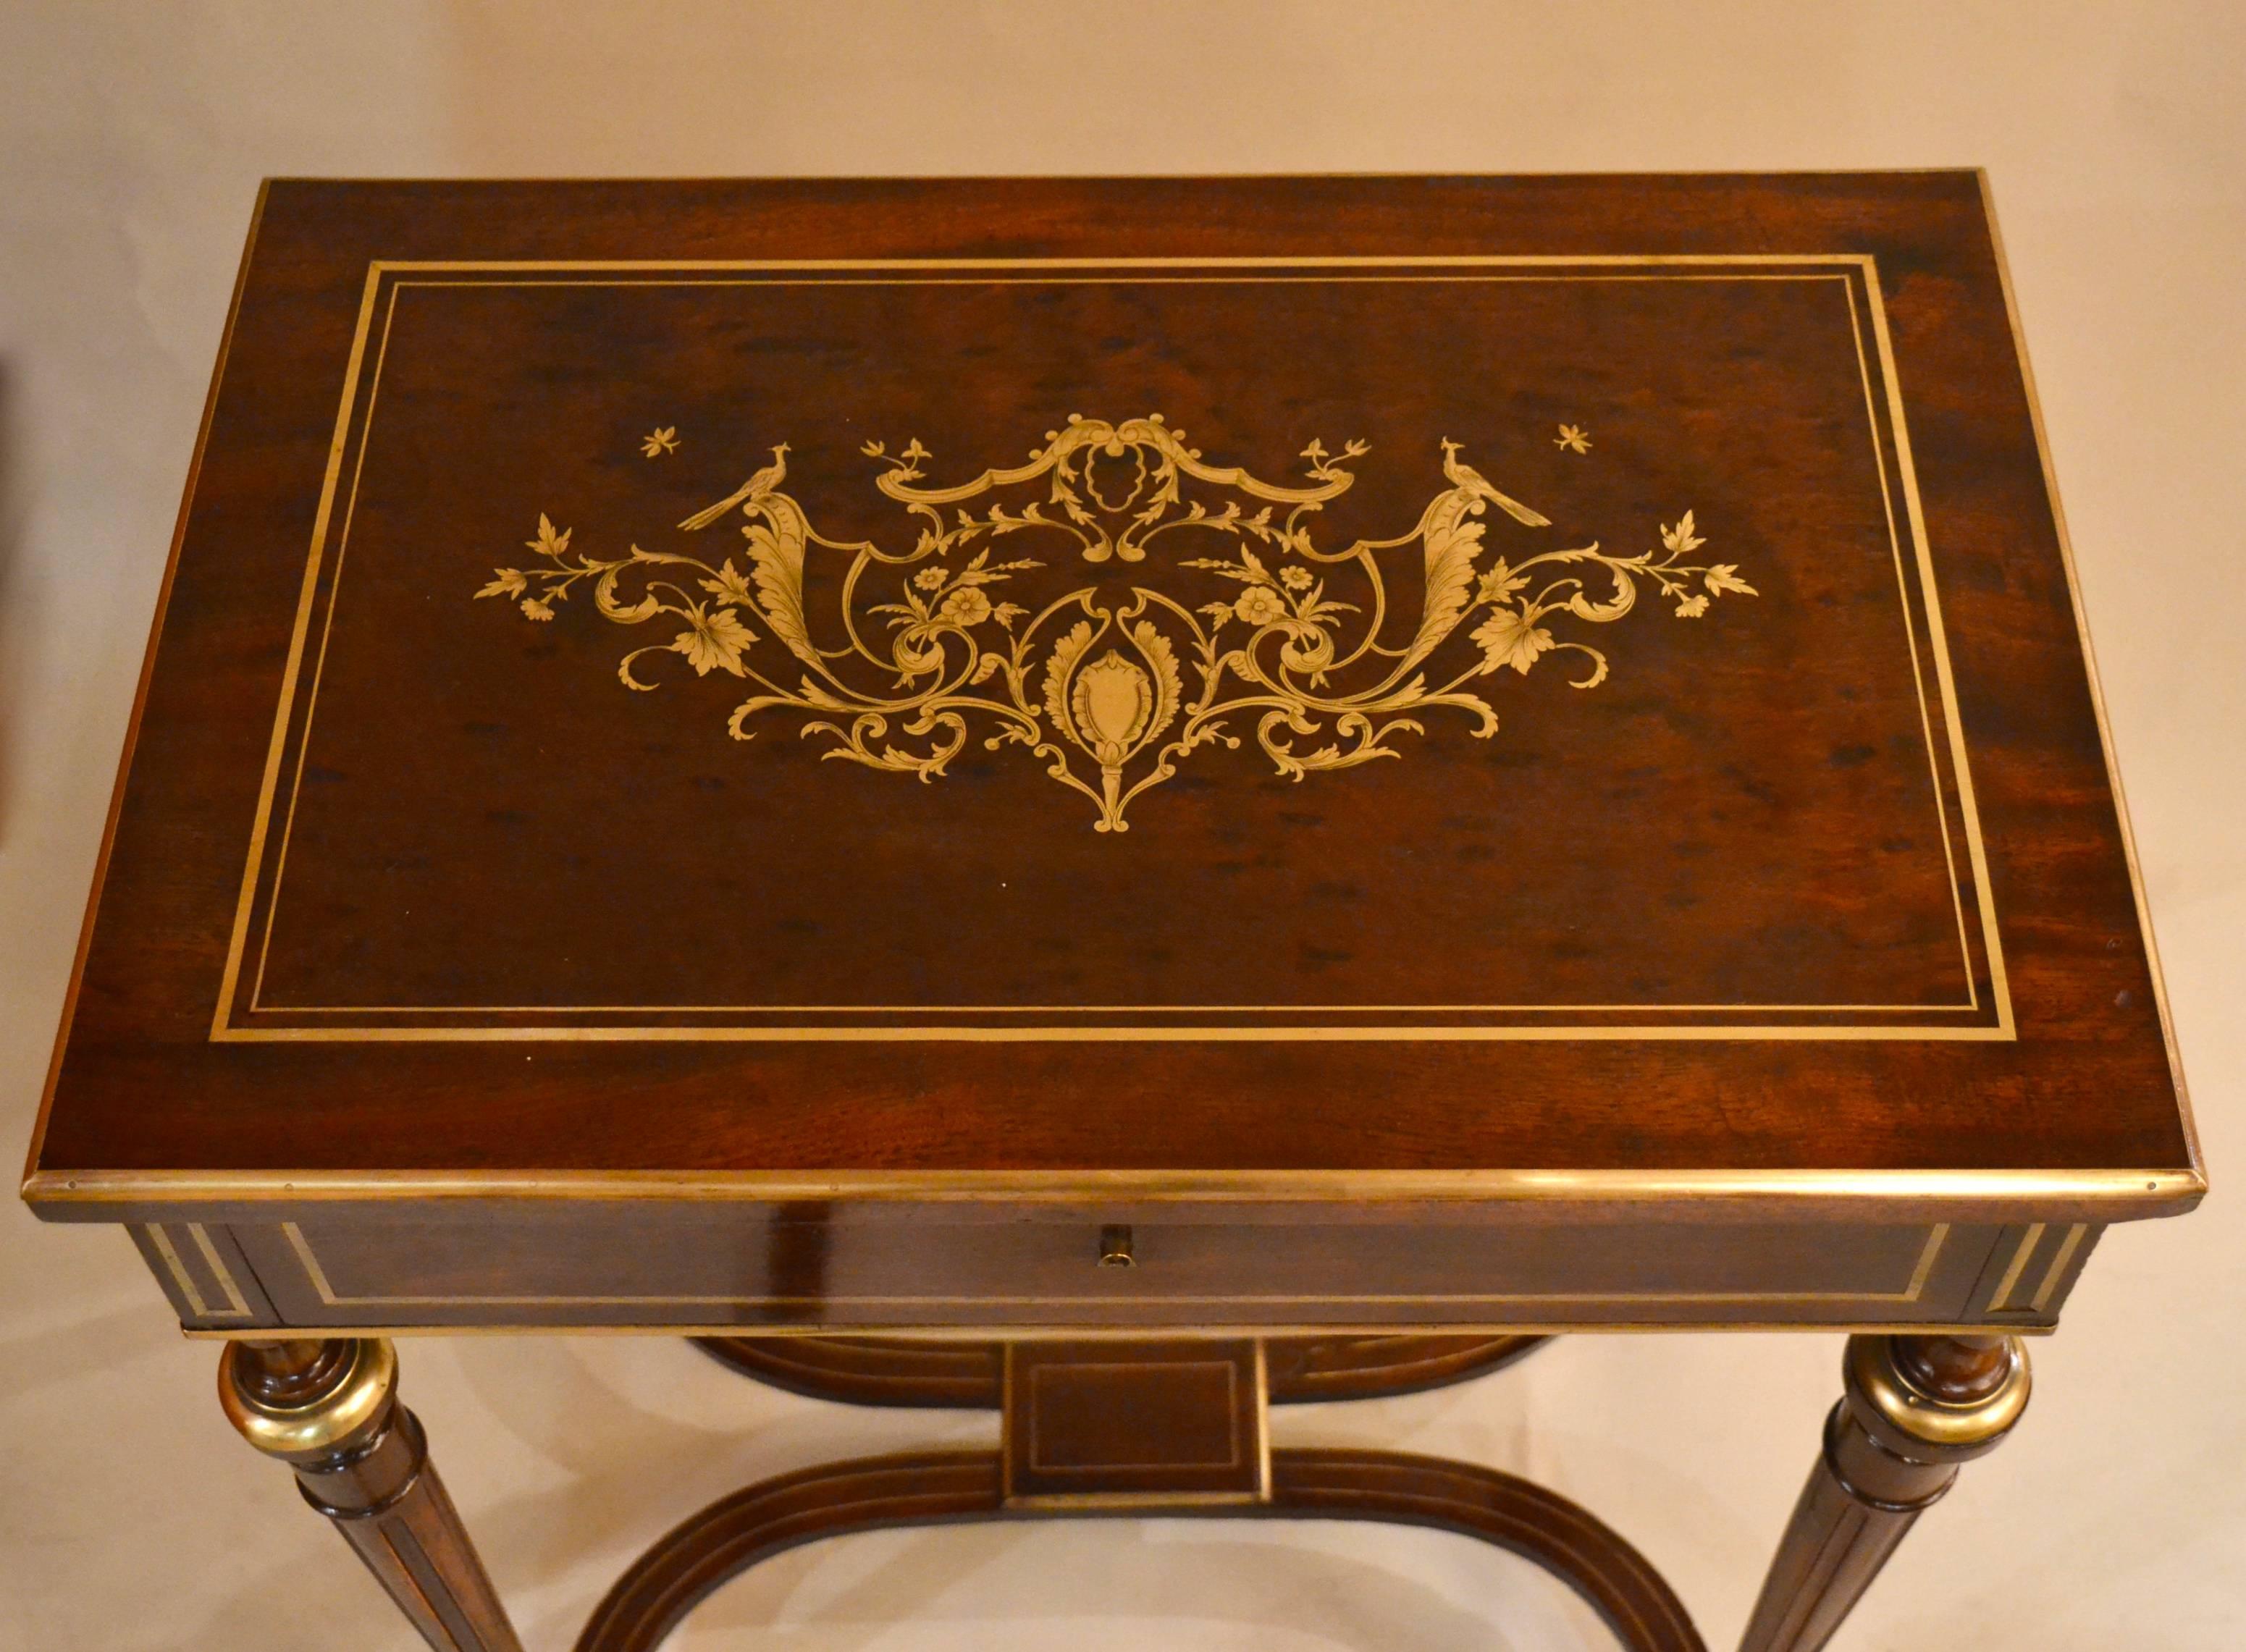 Antique French Poudreuse Vanity Table with Gold Bronze Detail, circa 1860-1870 In Excellent Condition For Sale In New Orleans, LA